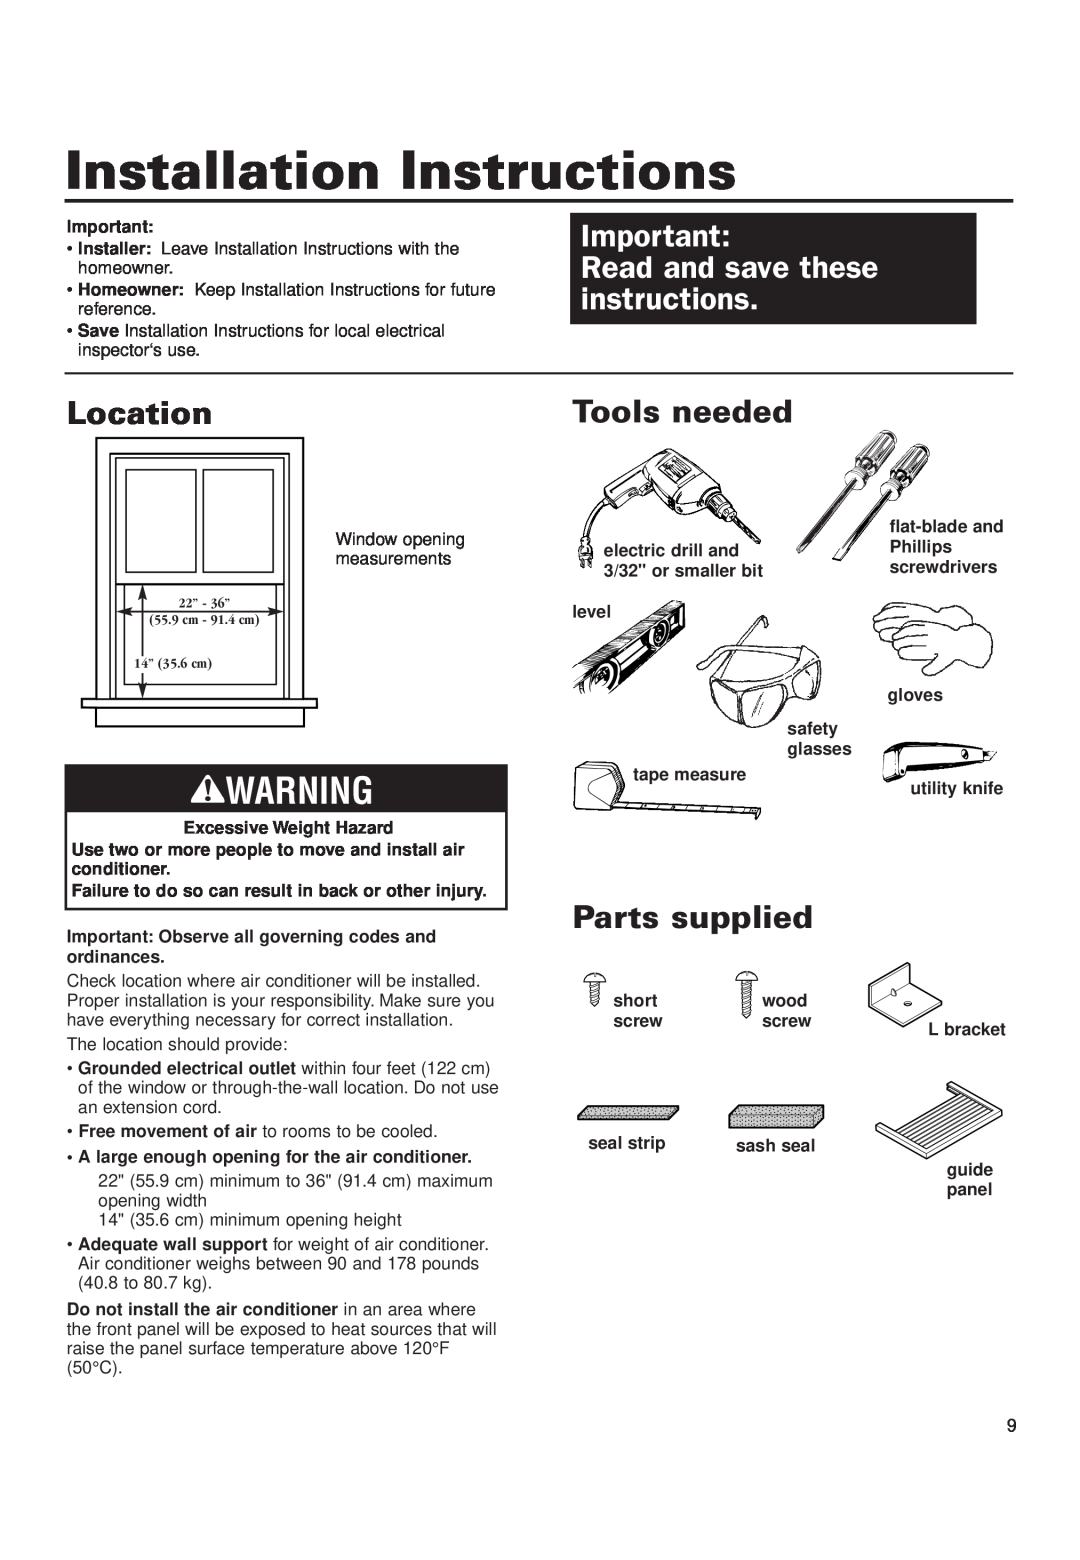 Whirlpool 4380701 Installation Instructions, Read and save these instructions, Location, Tools needed, Parts supplied 